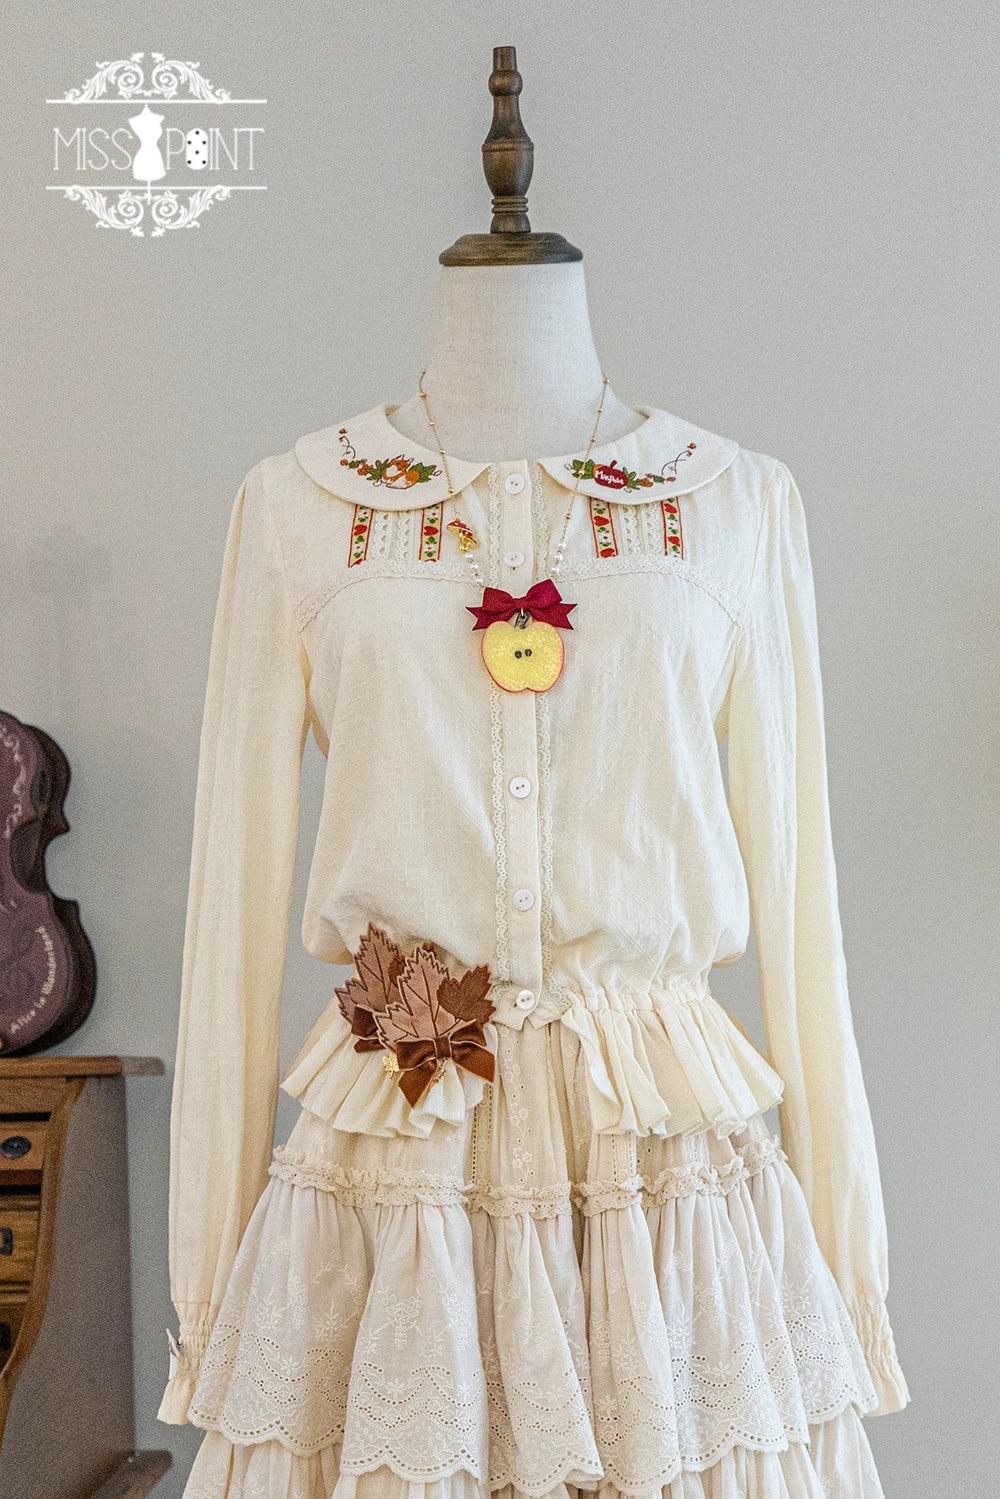 Miss Point~Fat Fox in the Forest~Sweet Lolita Shirt Embroidered Collar Customized Blouse XS Beige 